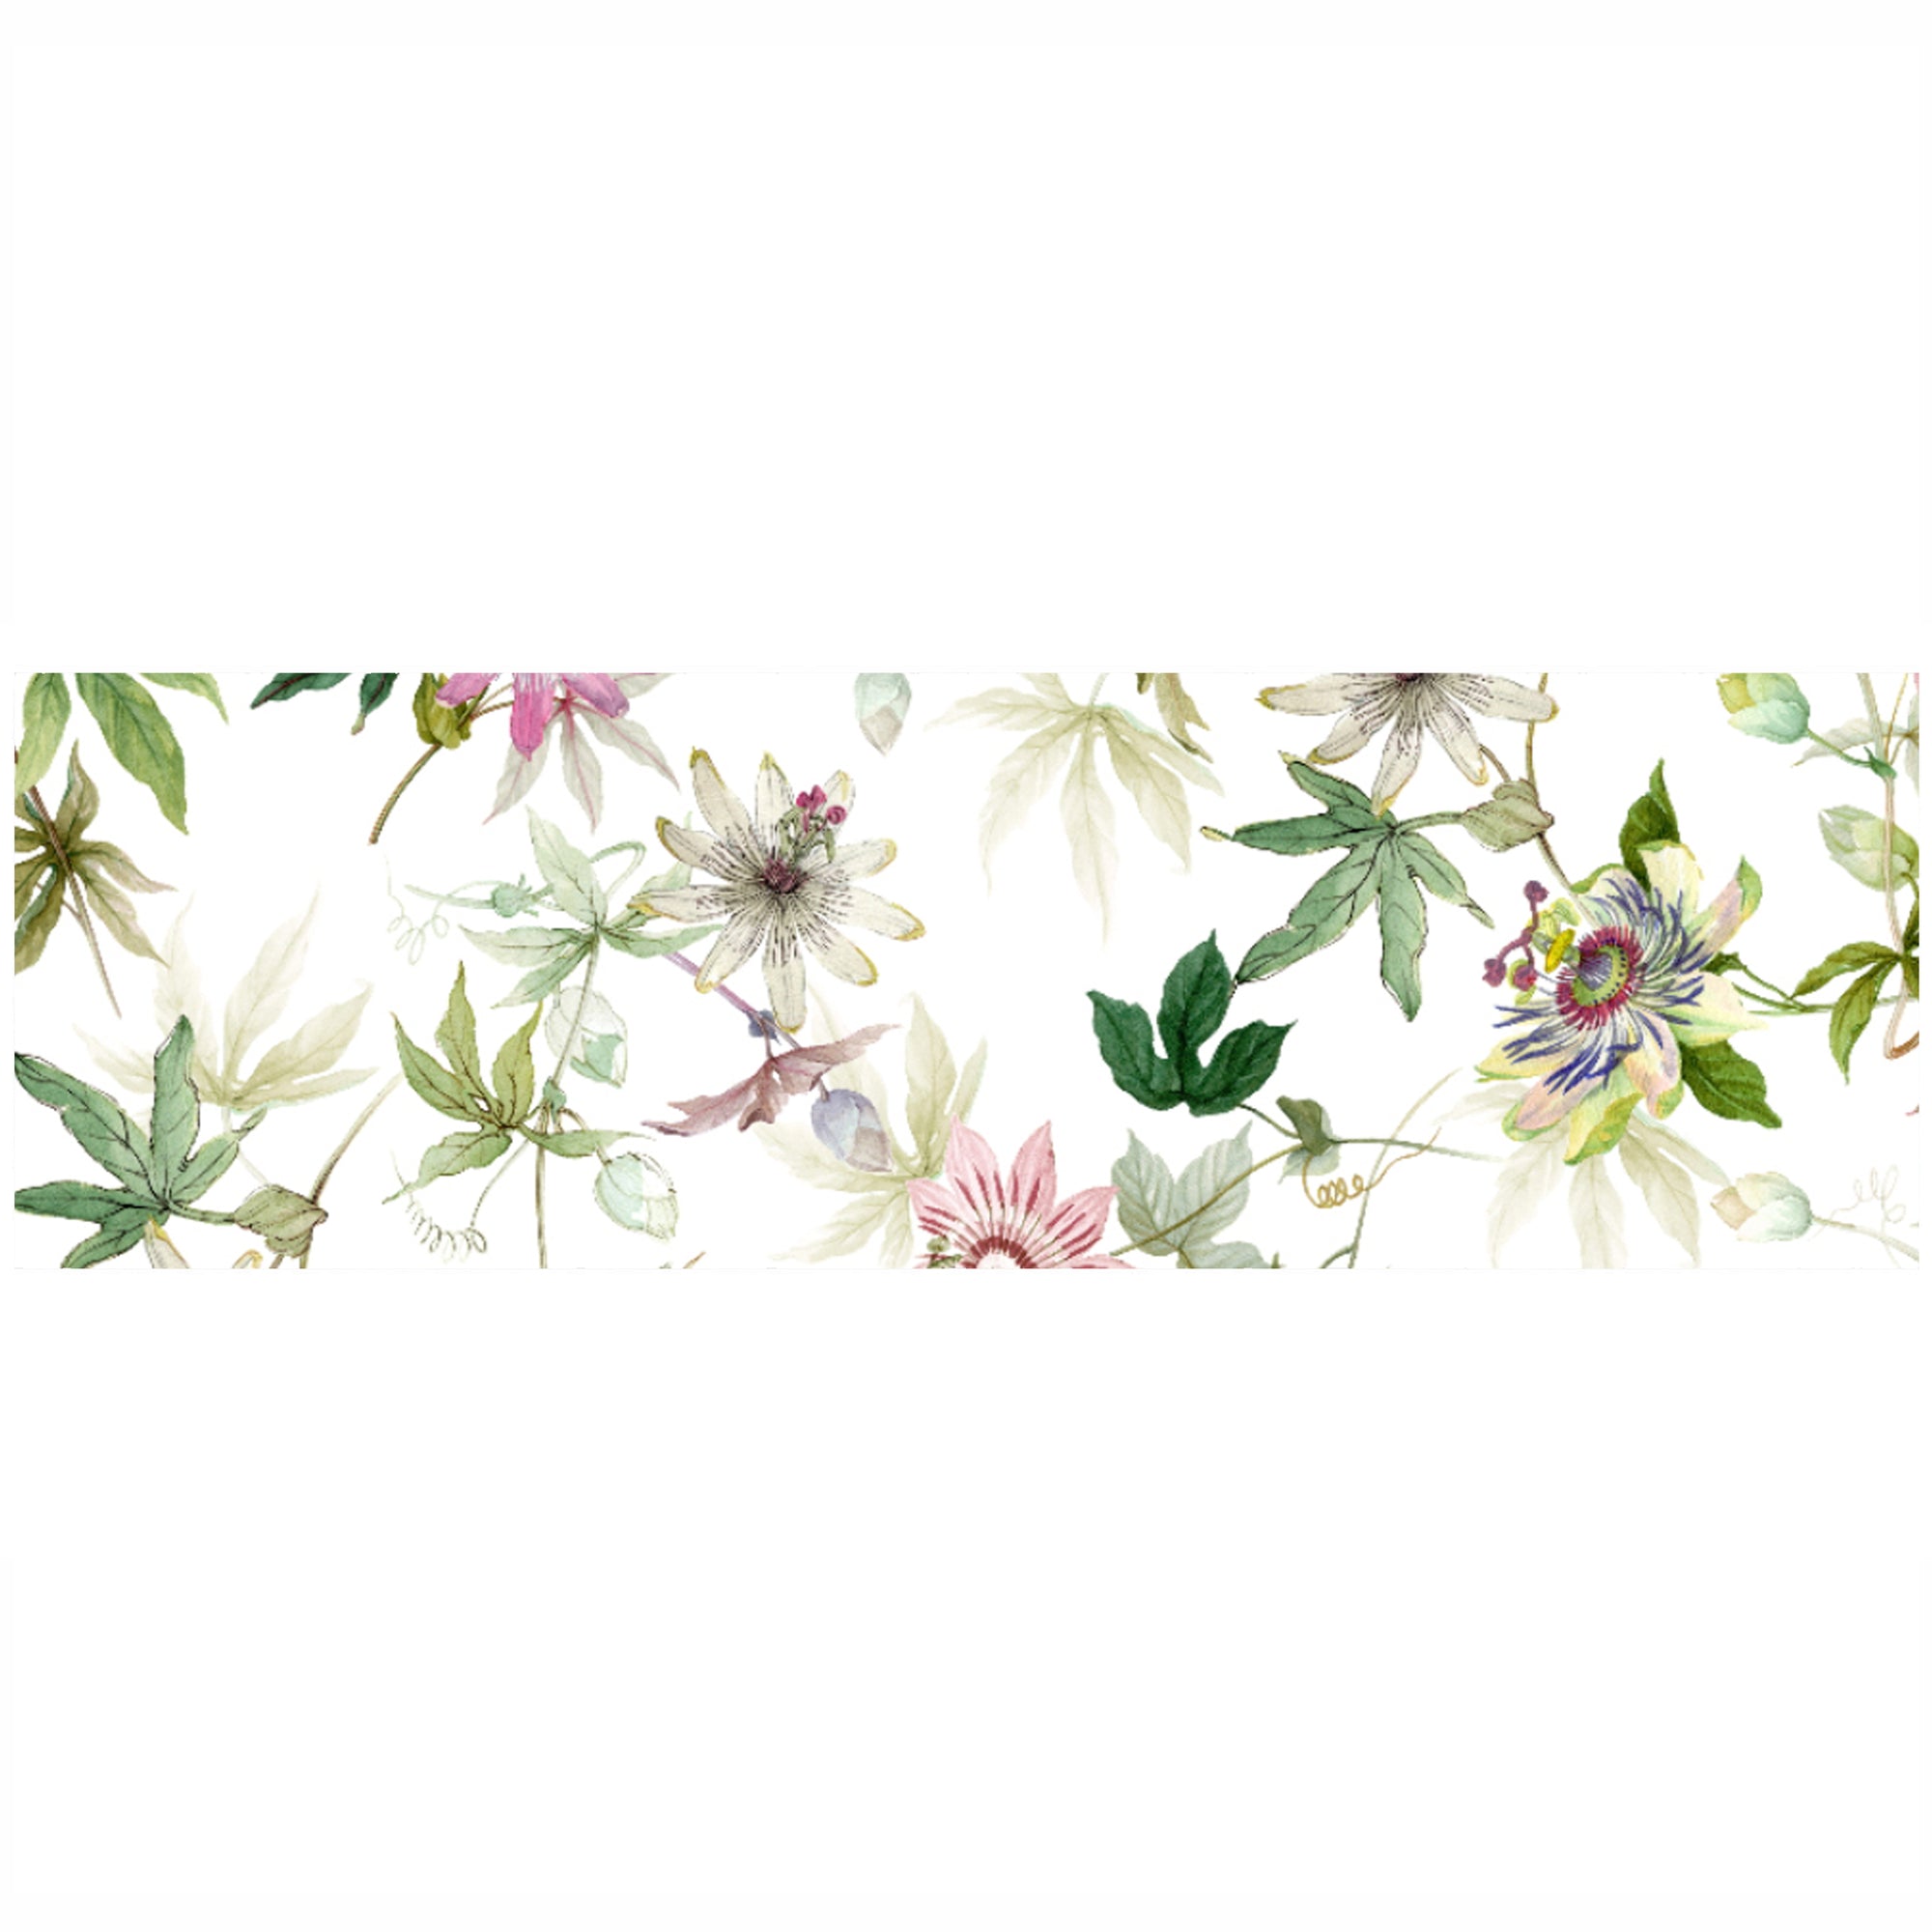 Passionflower Tablecloth Runner with vibrant floral watercolor on Italian linen from Caskata